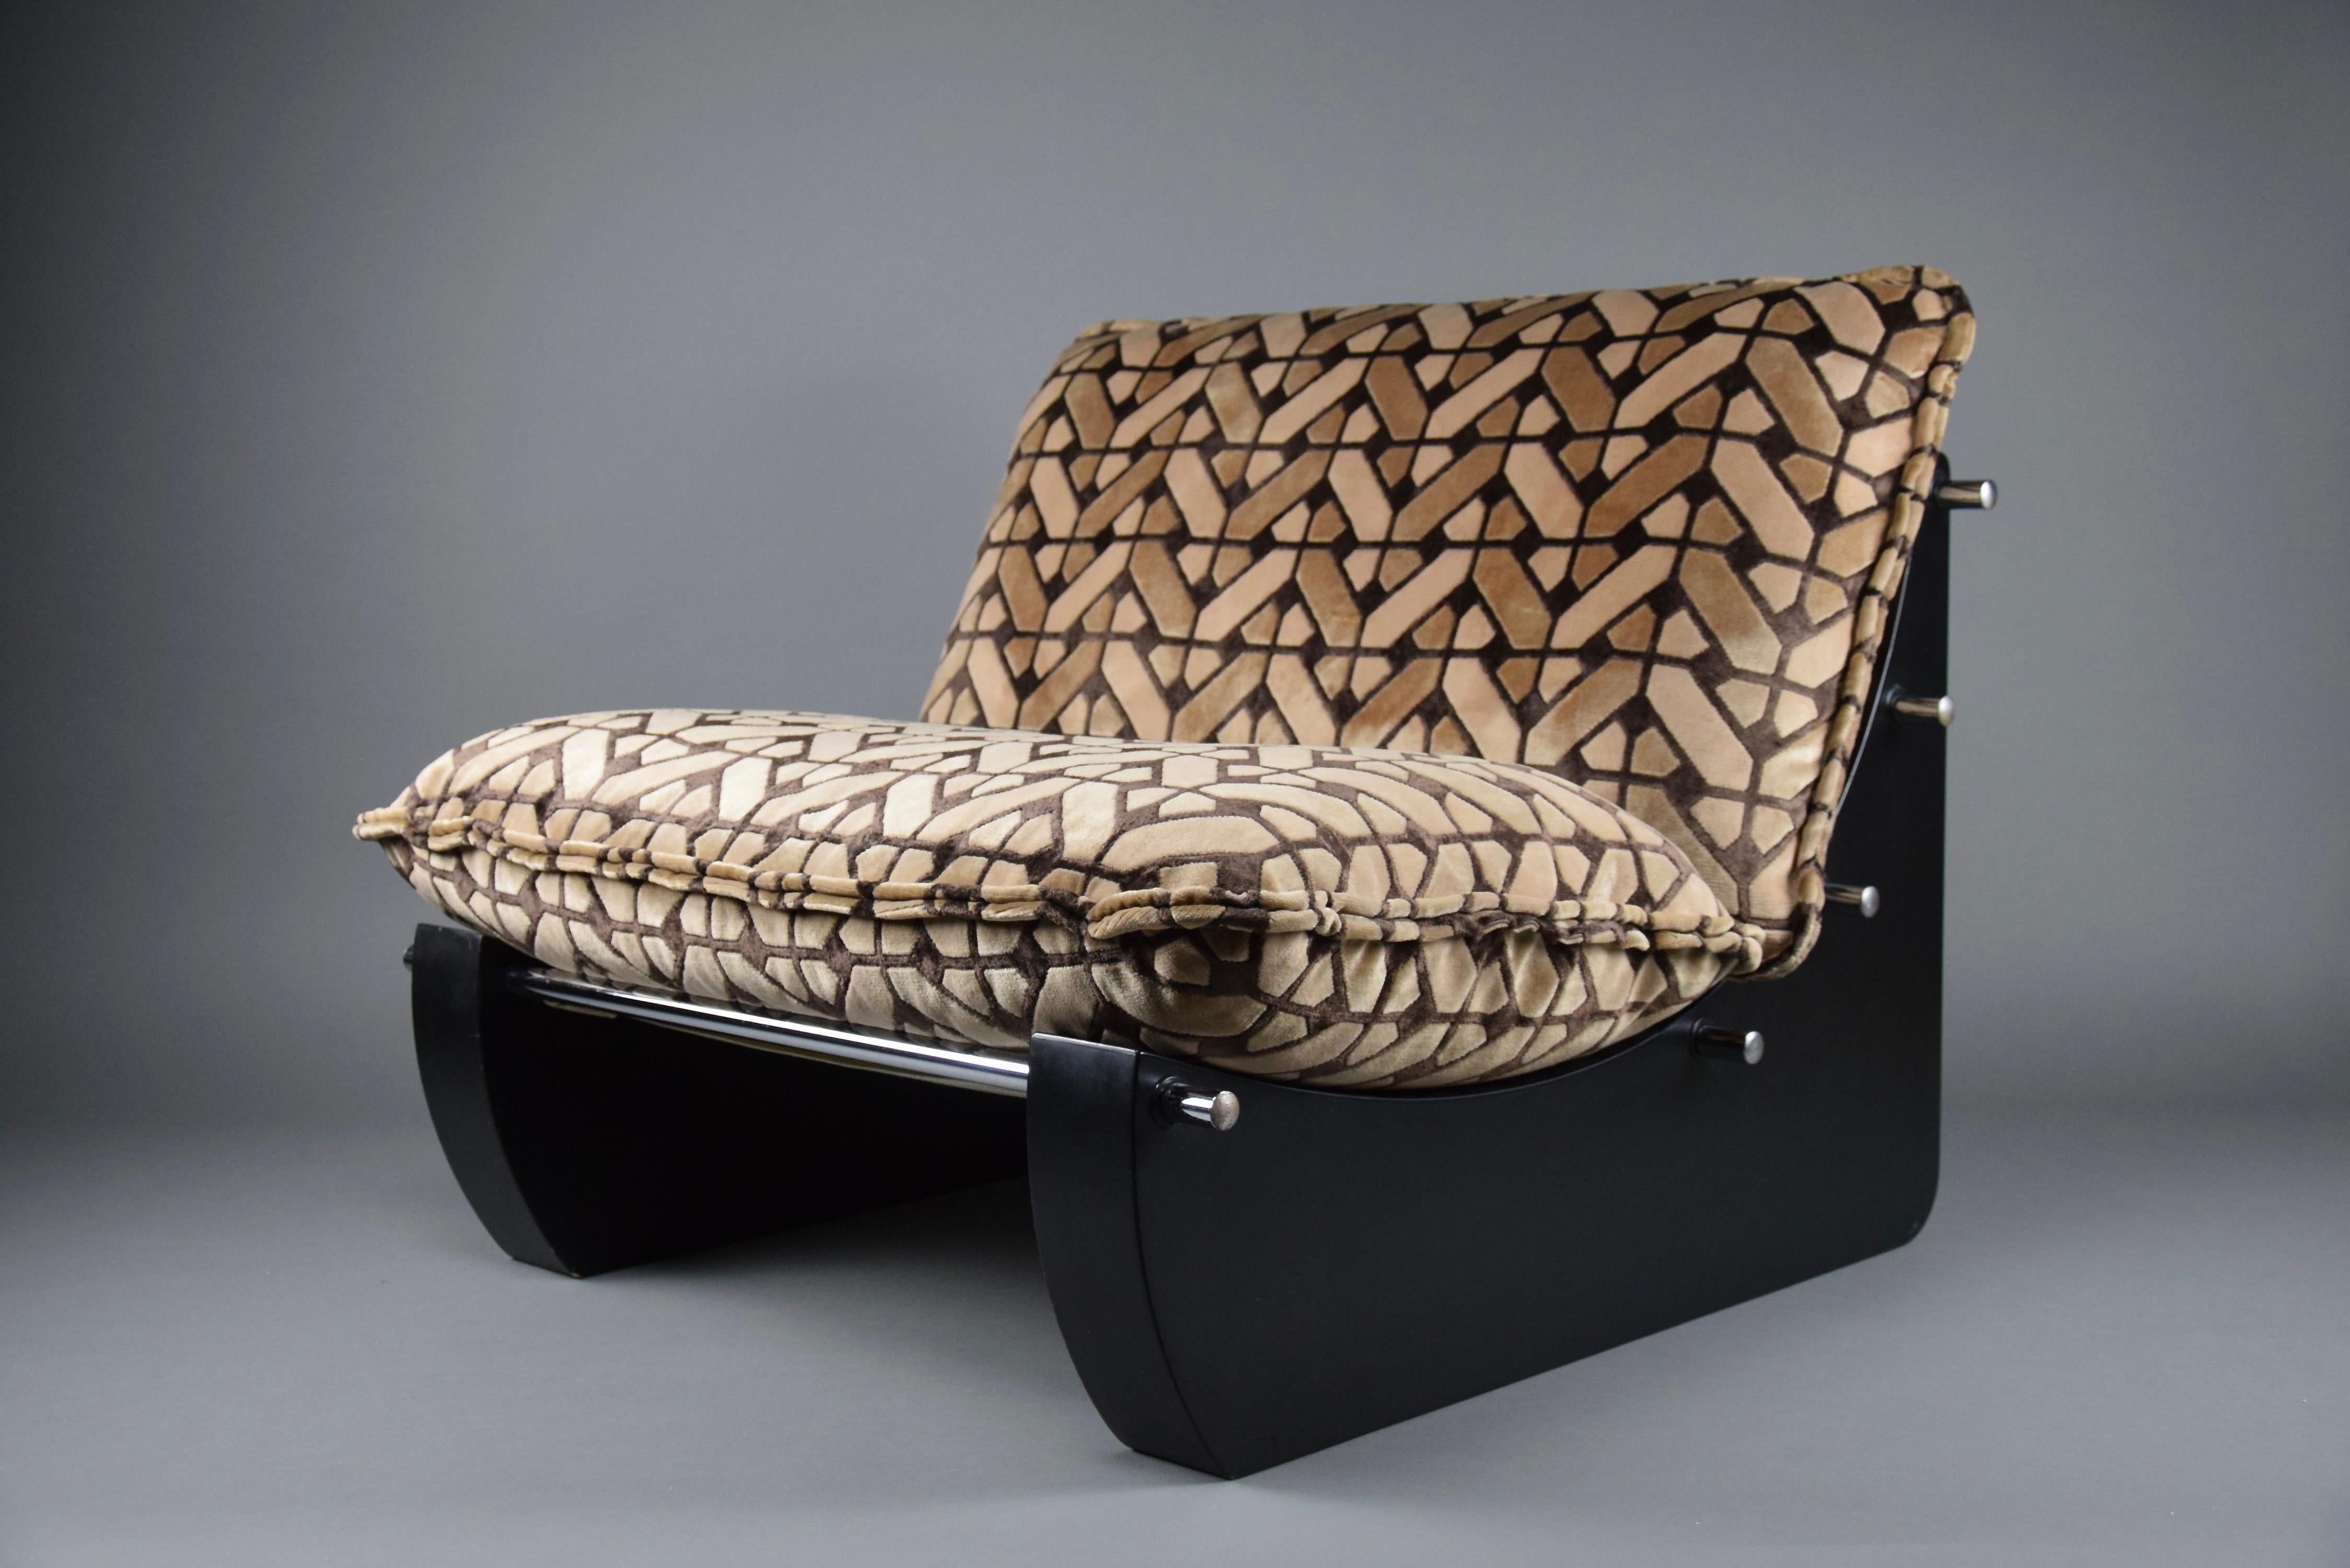 Beautiful and extremely comfortable late 1960's early 1970's lounge chair designed by Giuseppe Munari for Poltrone Munari.
Original upholstery in great condition.
The chair will be shipped insured overseas in a custom made wooden crate. Cost of